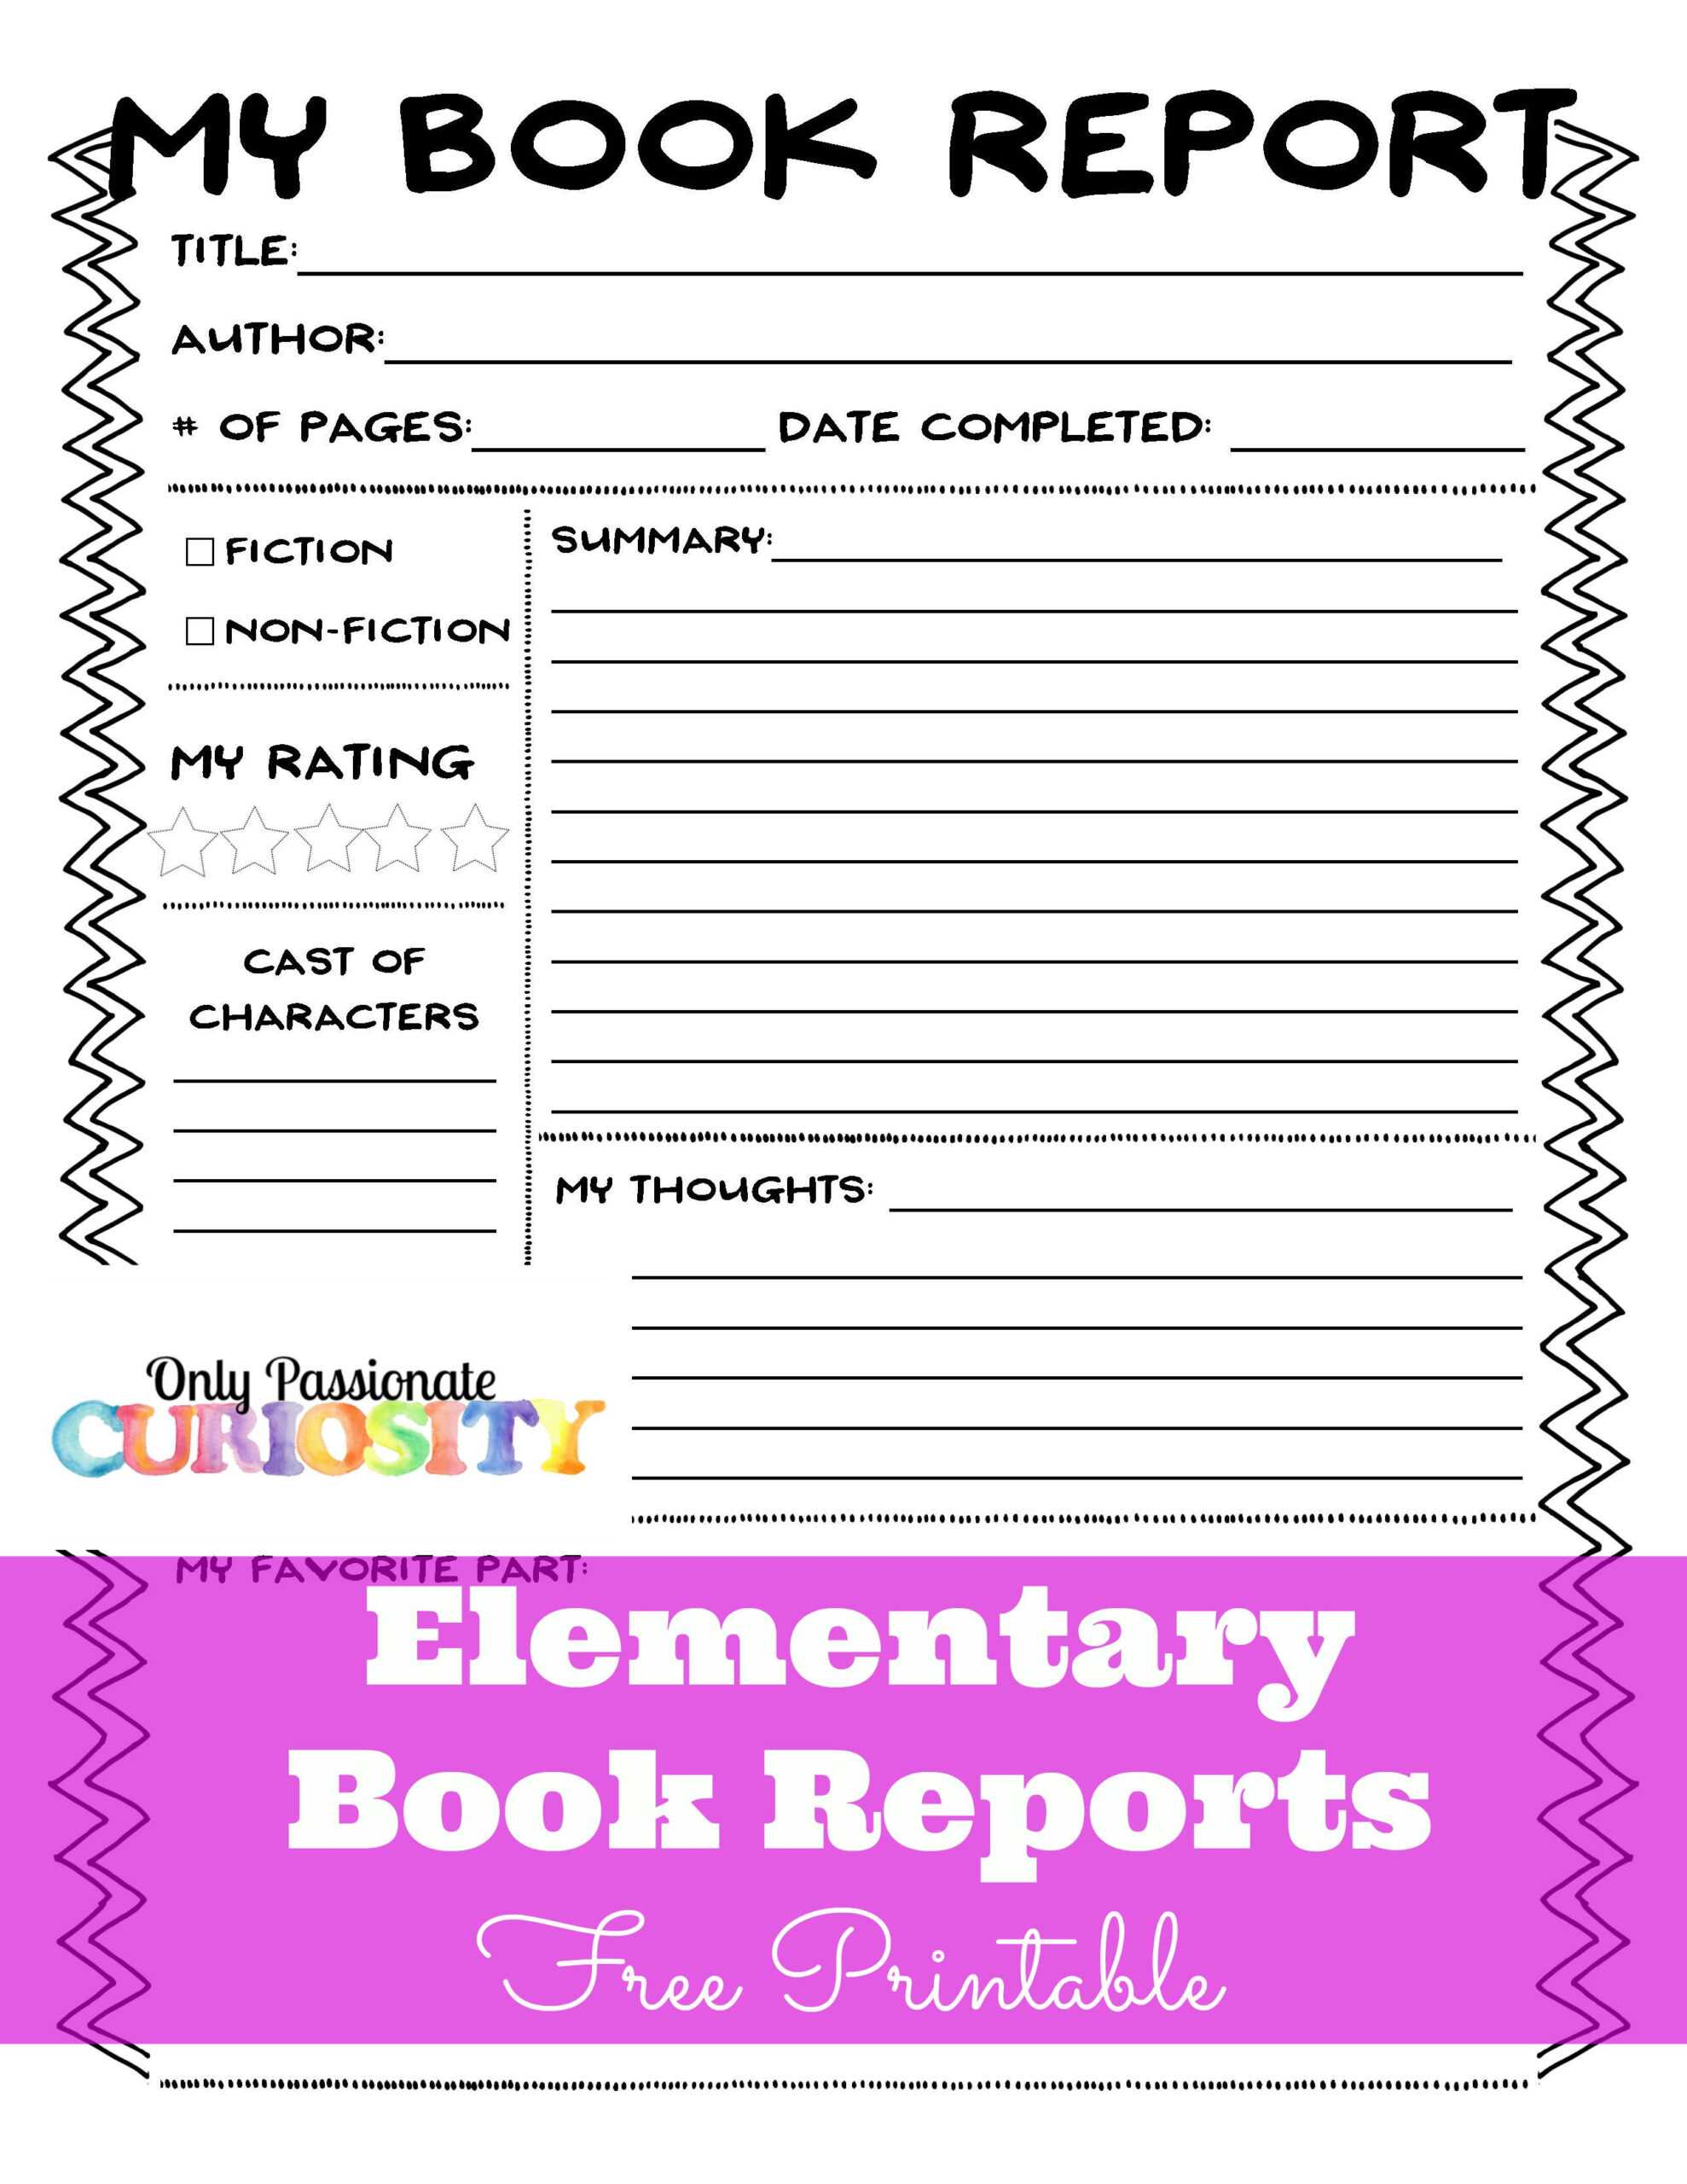 Sandwich Book Report Printout Within Sandwich Book Report Printable Template